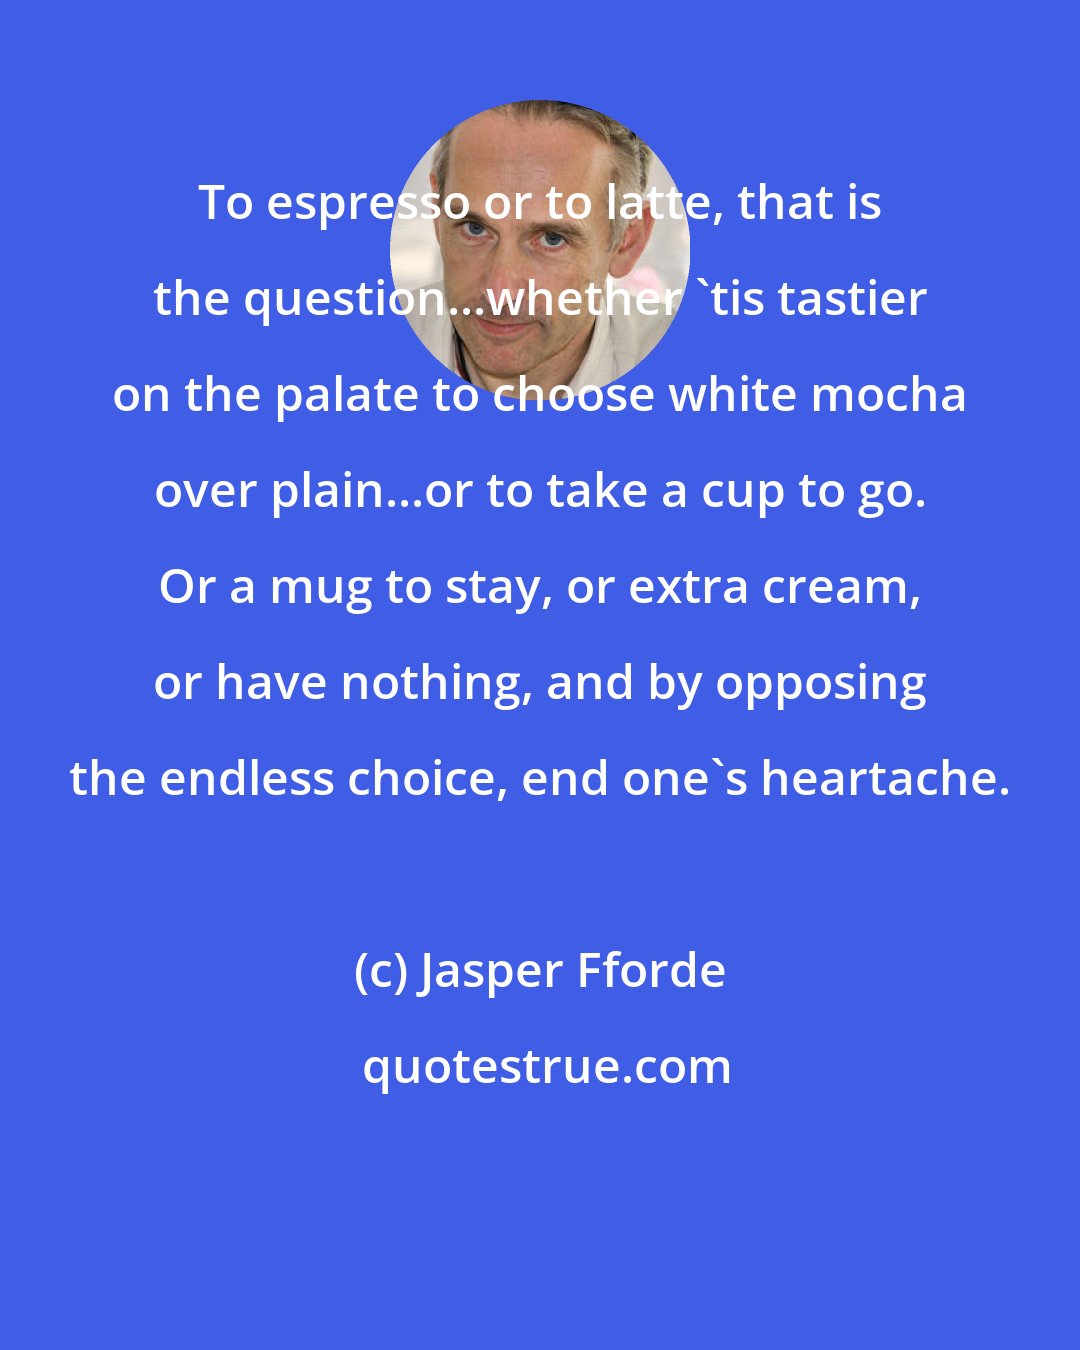 Jasper Fforde: To espresso or to latte, that is the question...whether 'tis tastier on the palate to choose white mocha over plain...or to take a cup to go. Or a mug to stay, or extra cream, or have nothing, and by opposing the endless choice, end one's heartache.